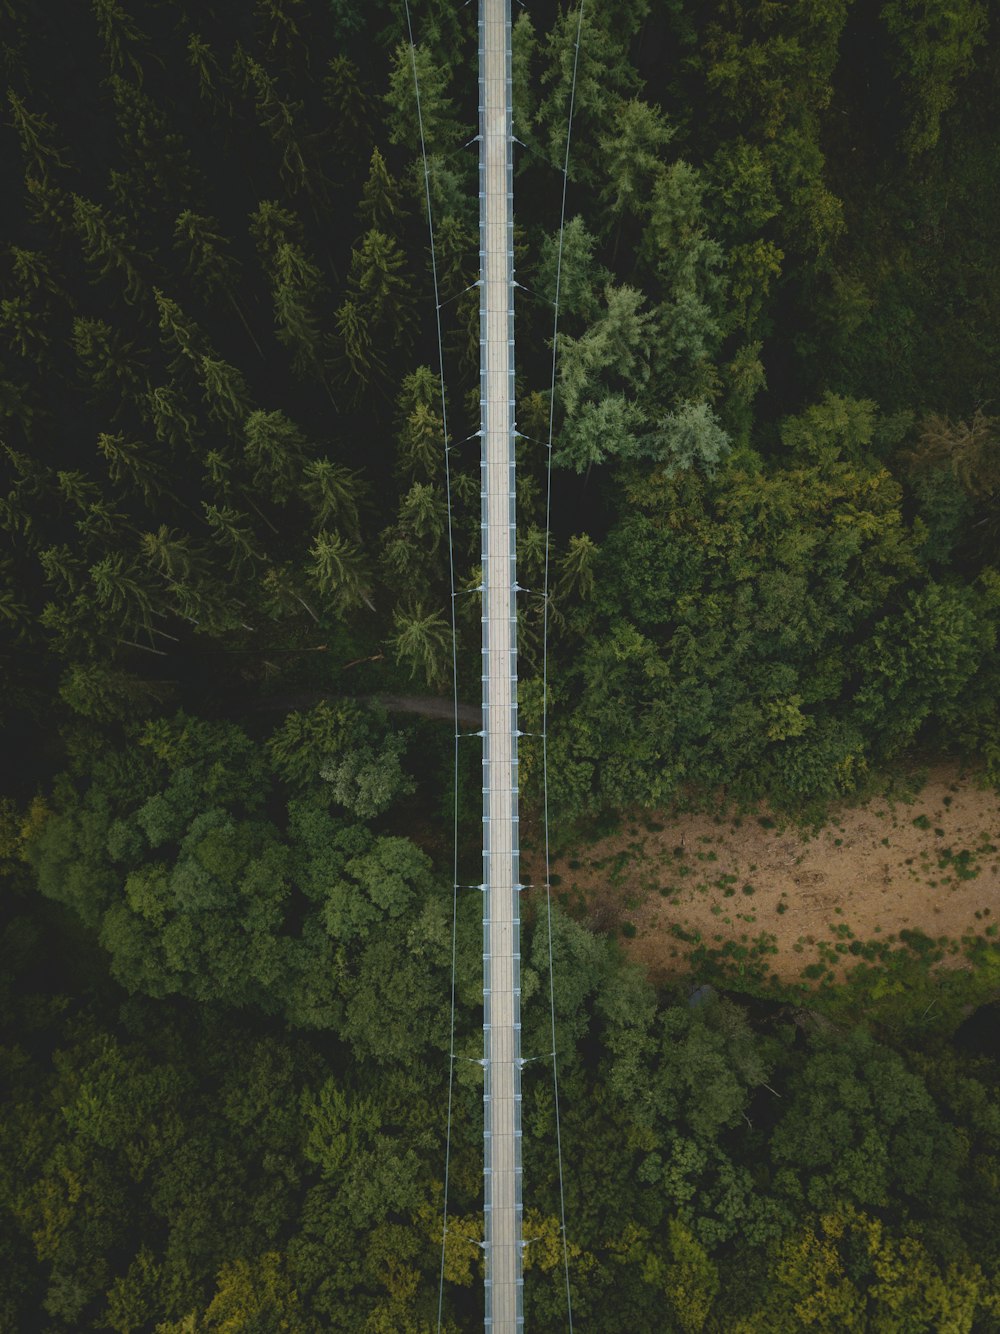 aerial photo of hanging bridge above green leafed trees